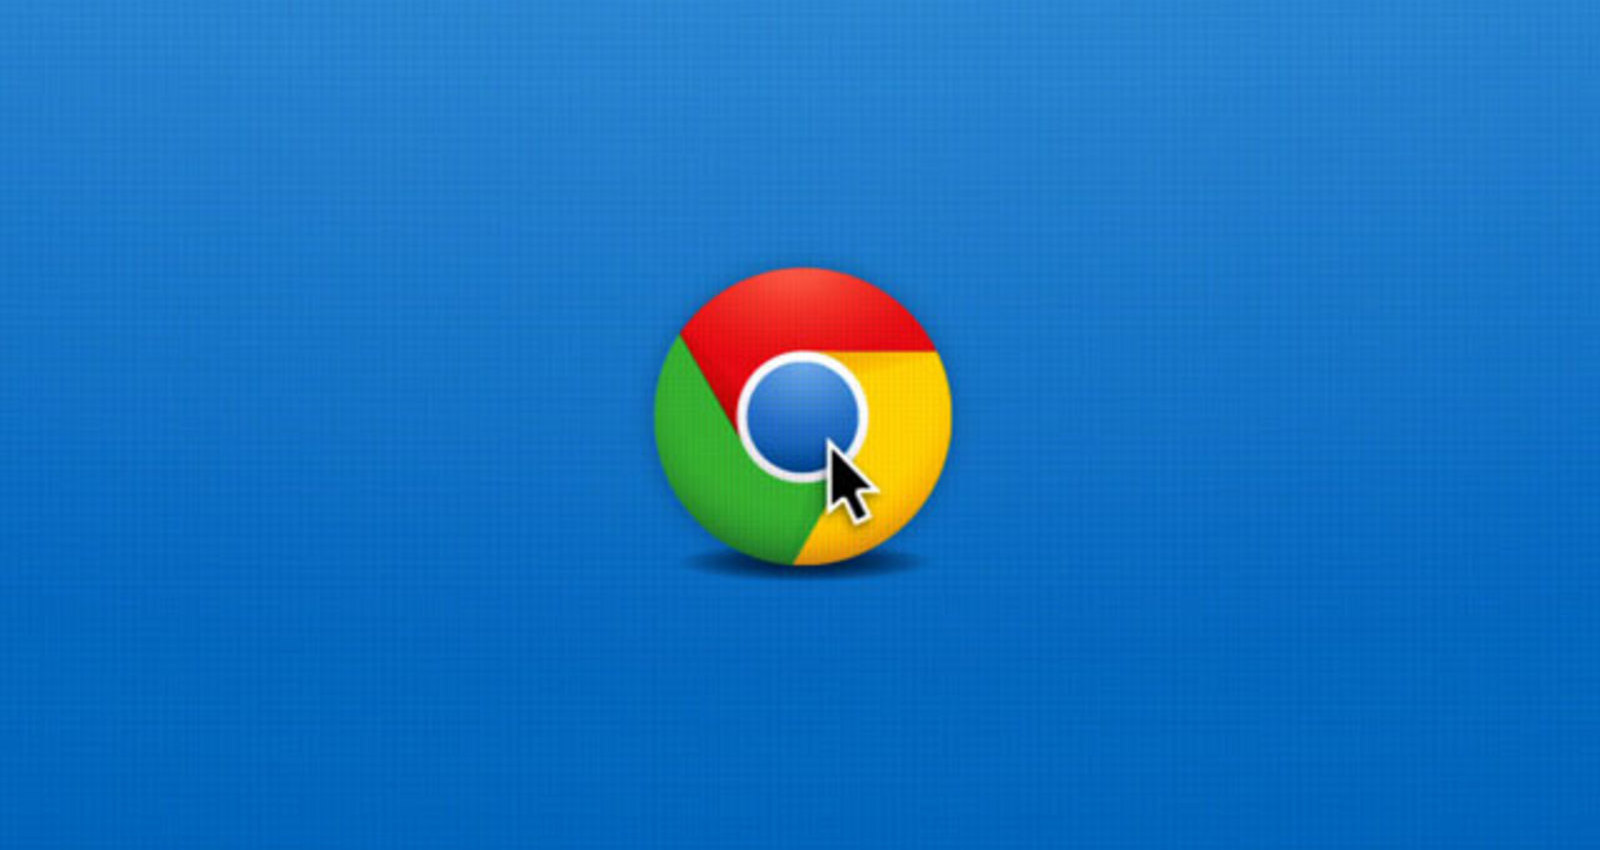 Google Chrome: The Web Is What You Make of It